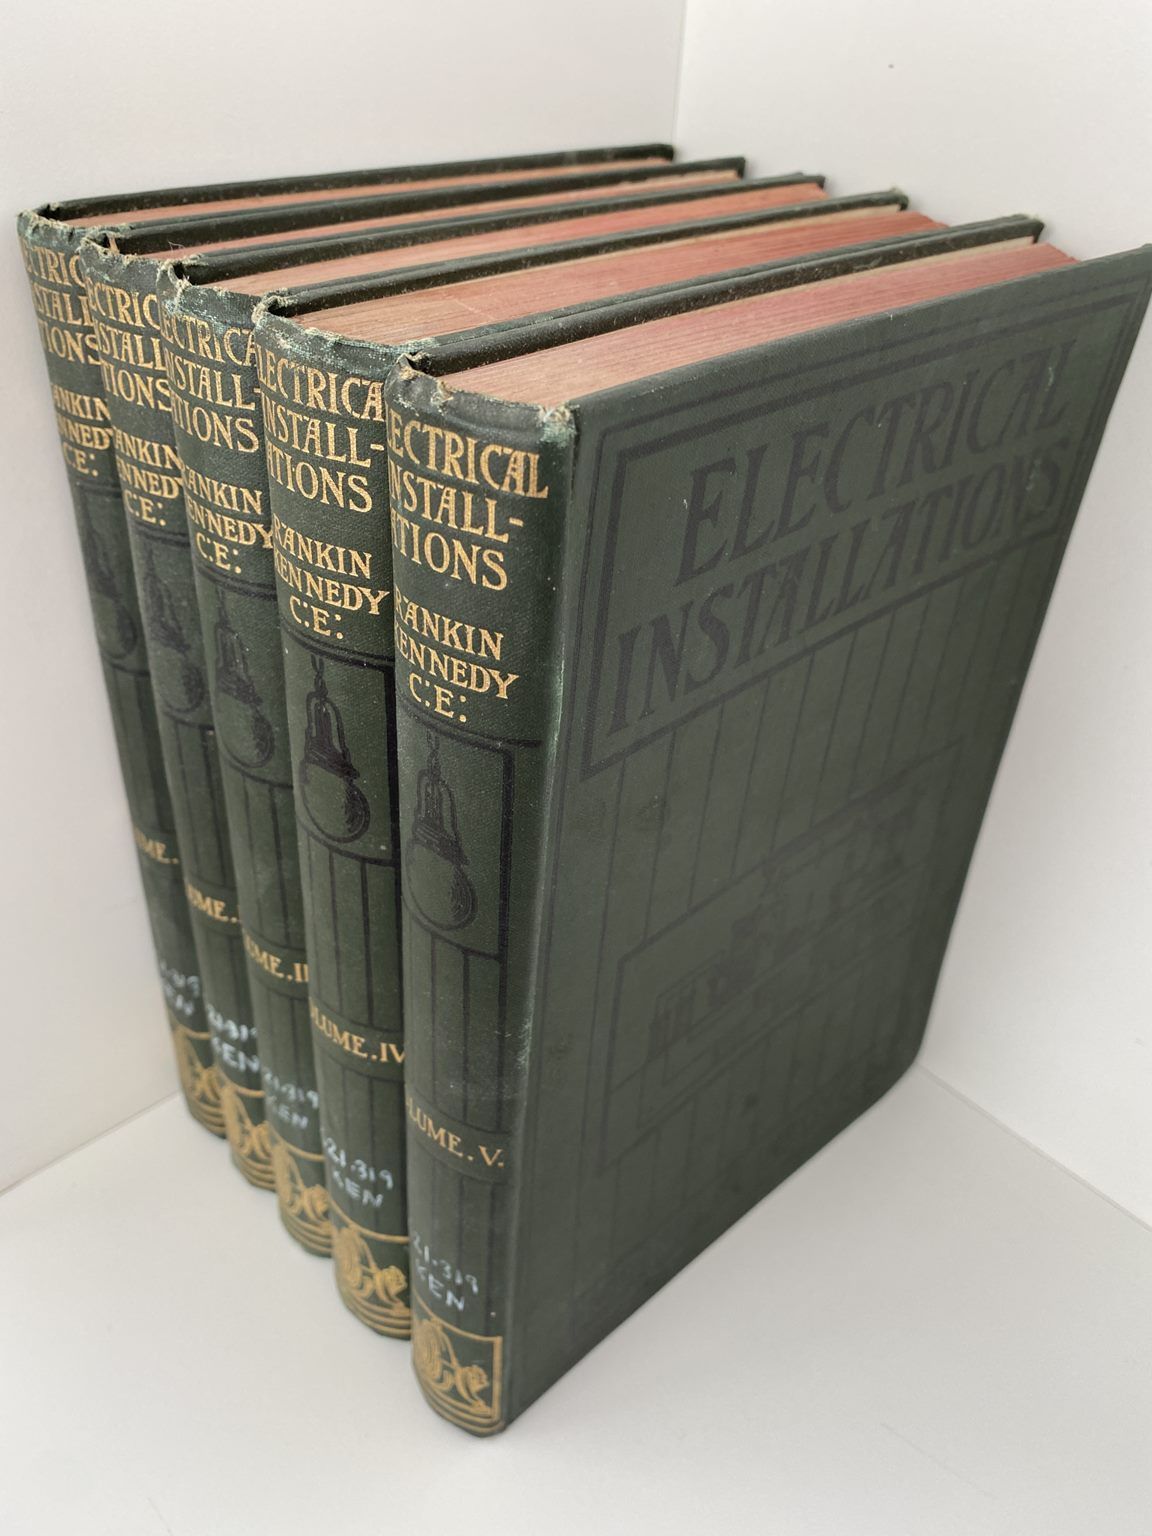 ELECTRICAL INSTALLATIONS by Rankin Kennedy - 5 Volume Set